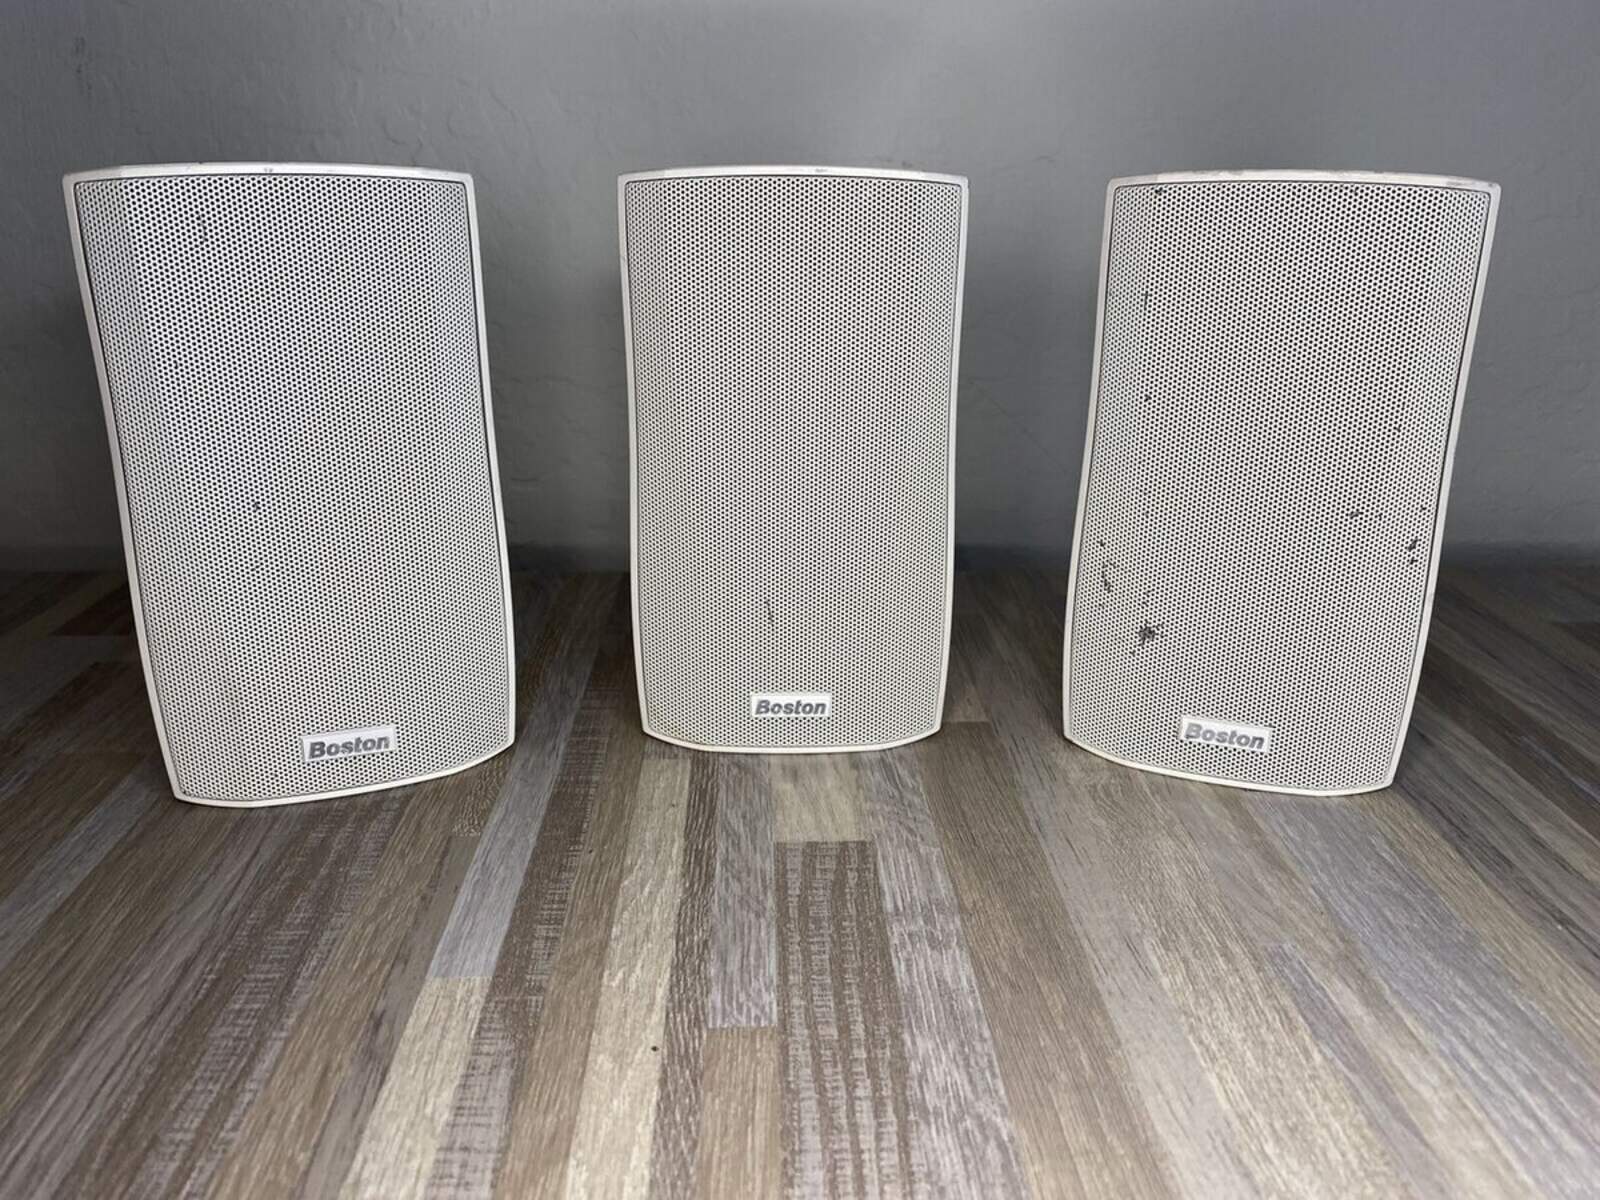 boston-acoustic-surround-sound-system-how-to-tell-speakers-apart